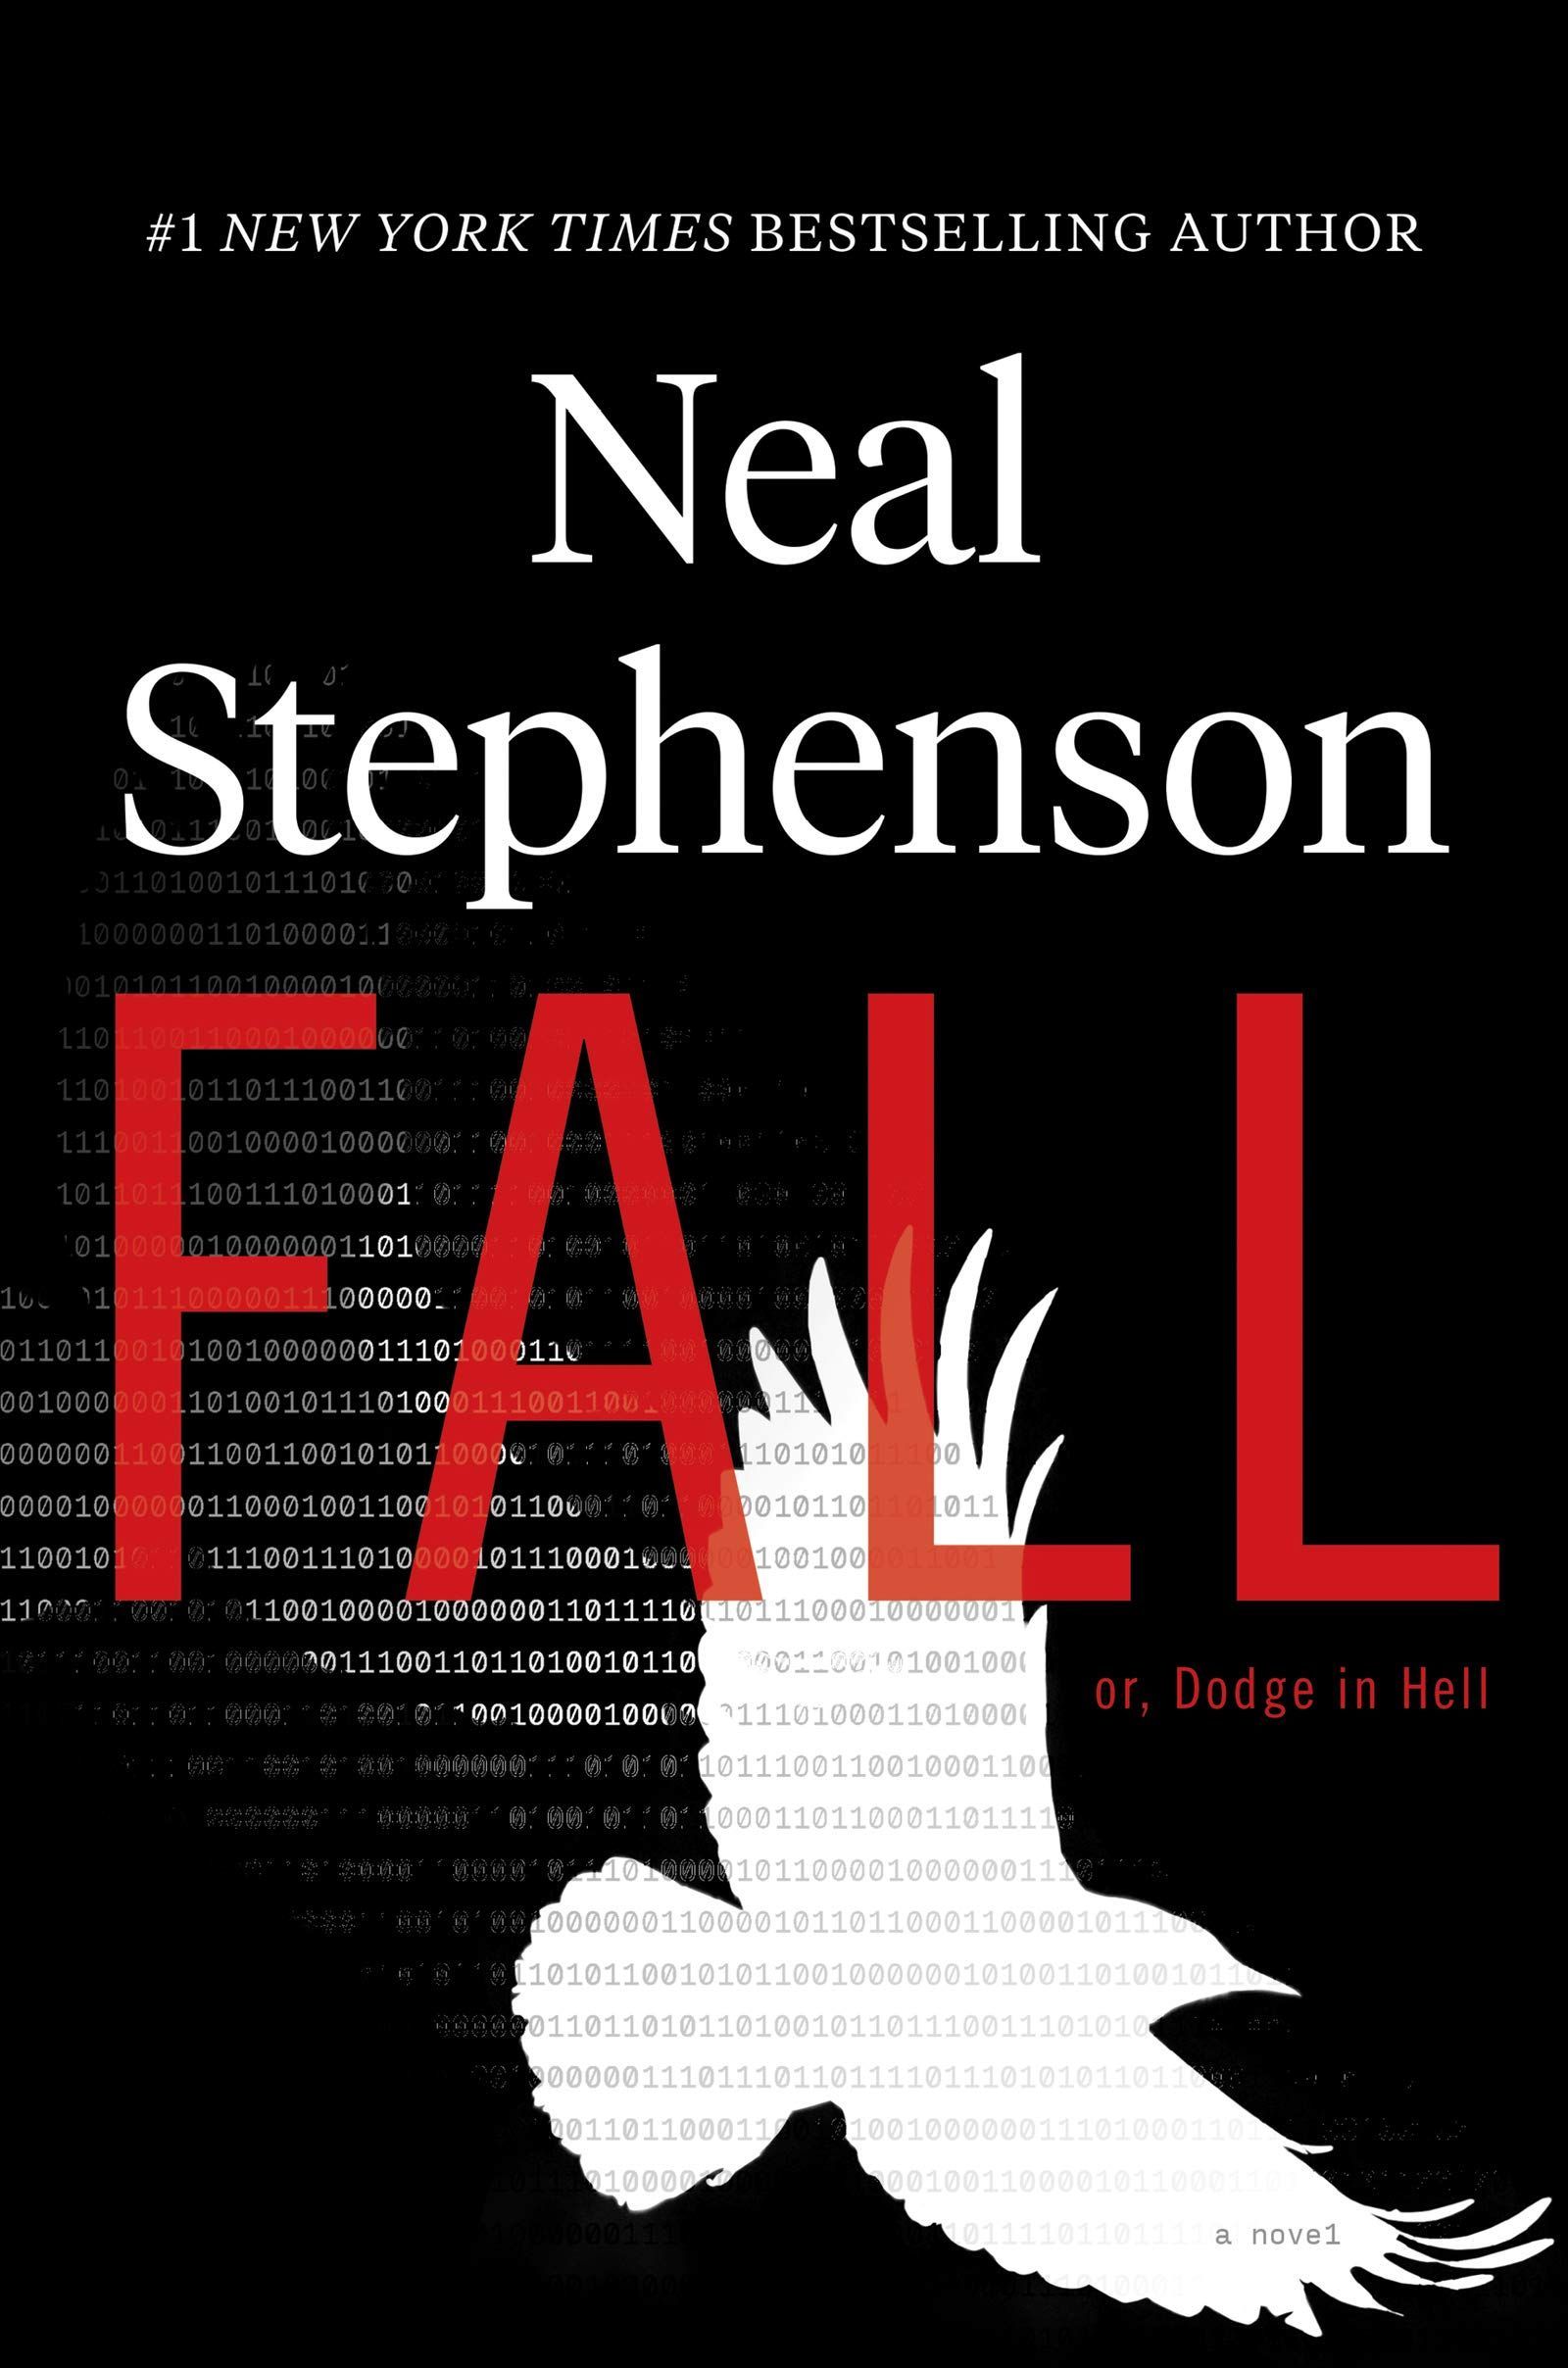 “Nonexistence Seems Preferable”: Post-Truth, Feed Identity, and the NPC Afterlife in Neal Stephenson’s “Fall; or, Dodge in Hell”